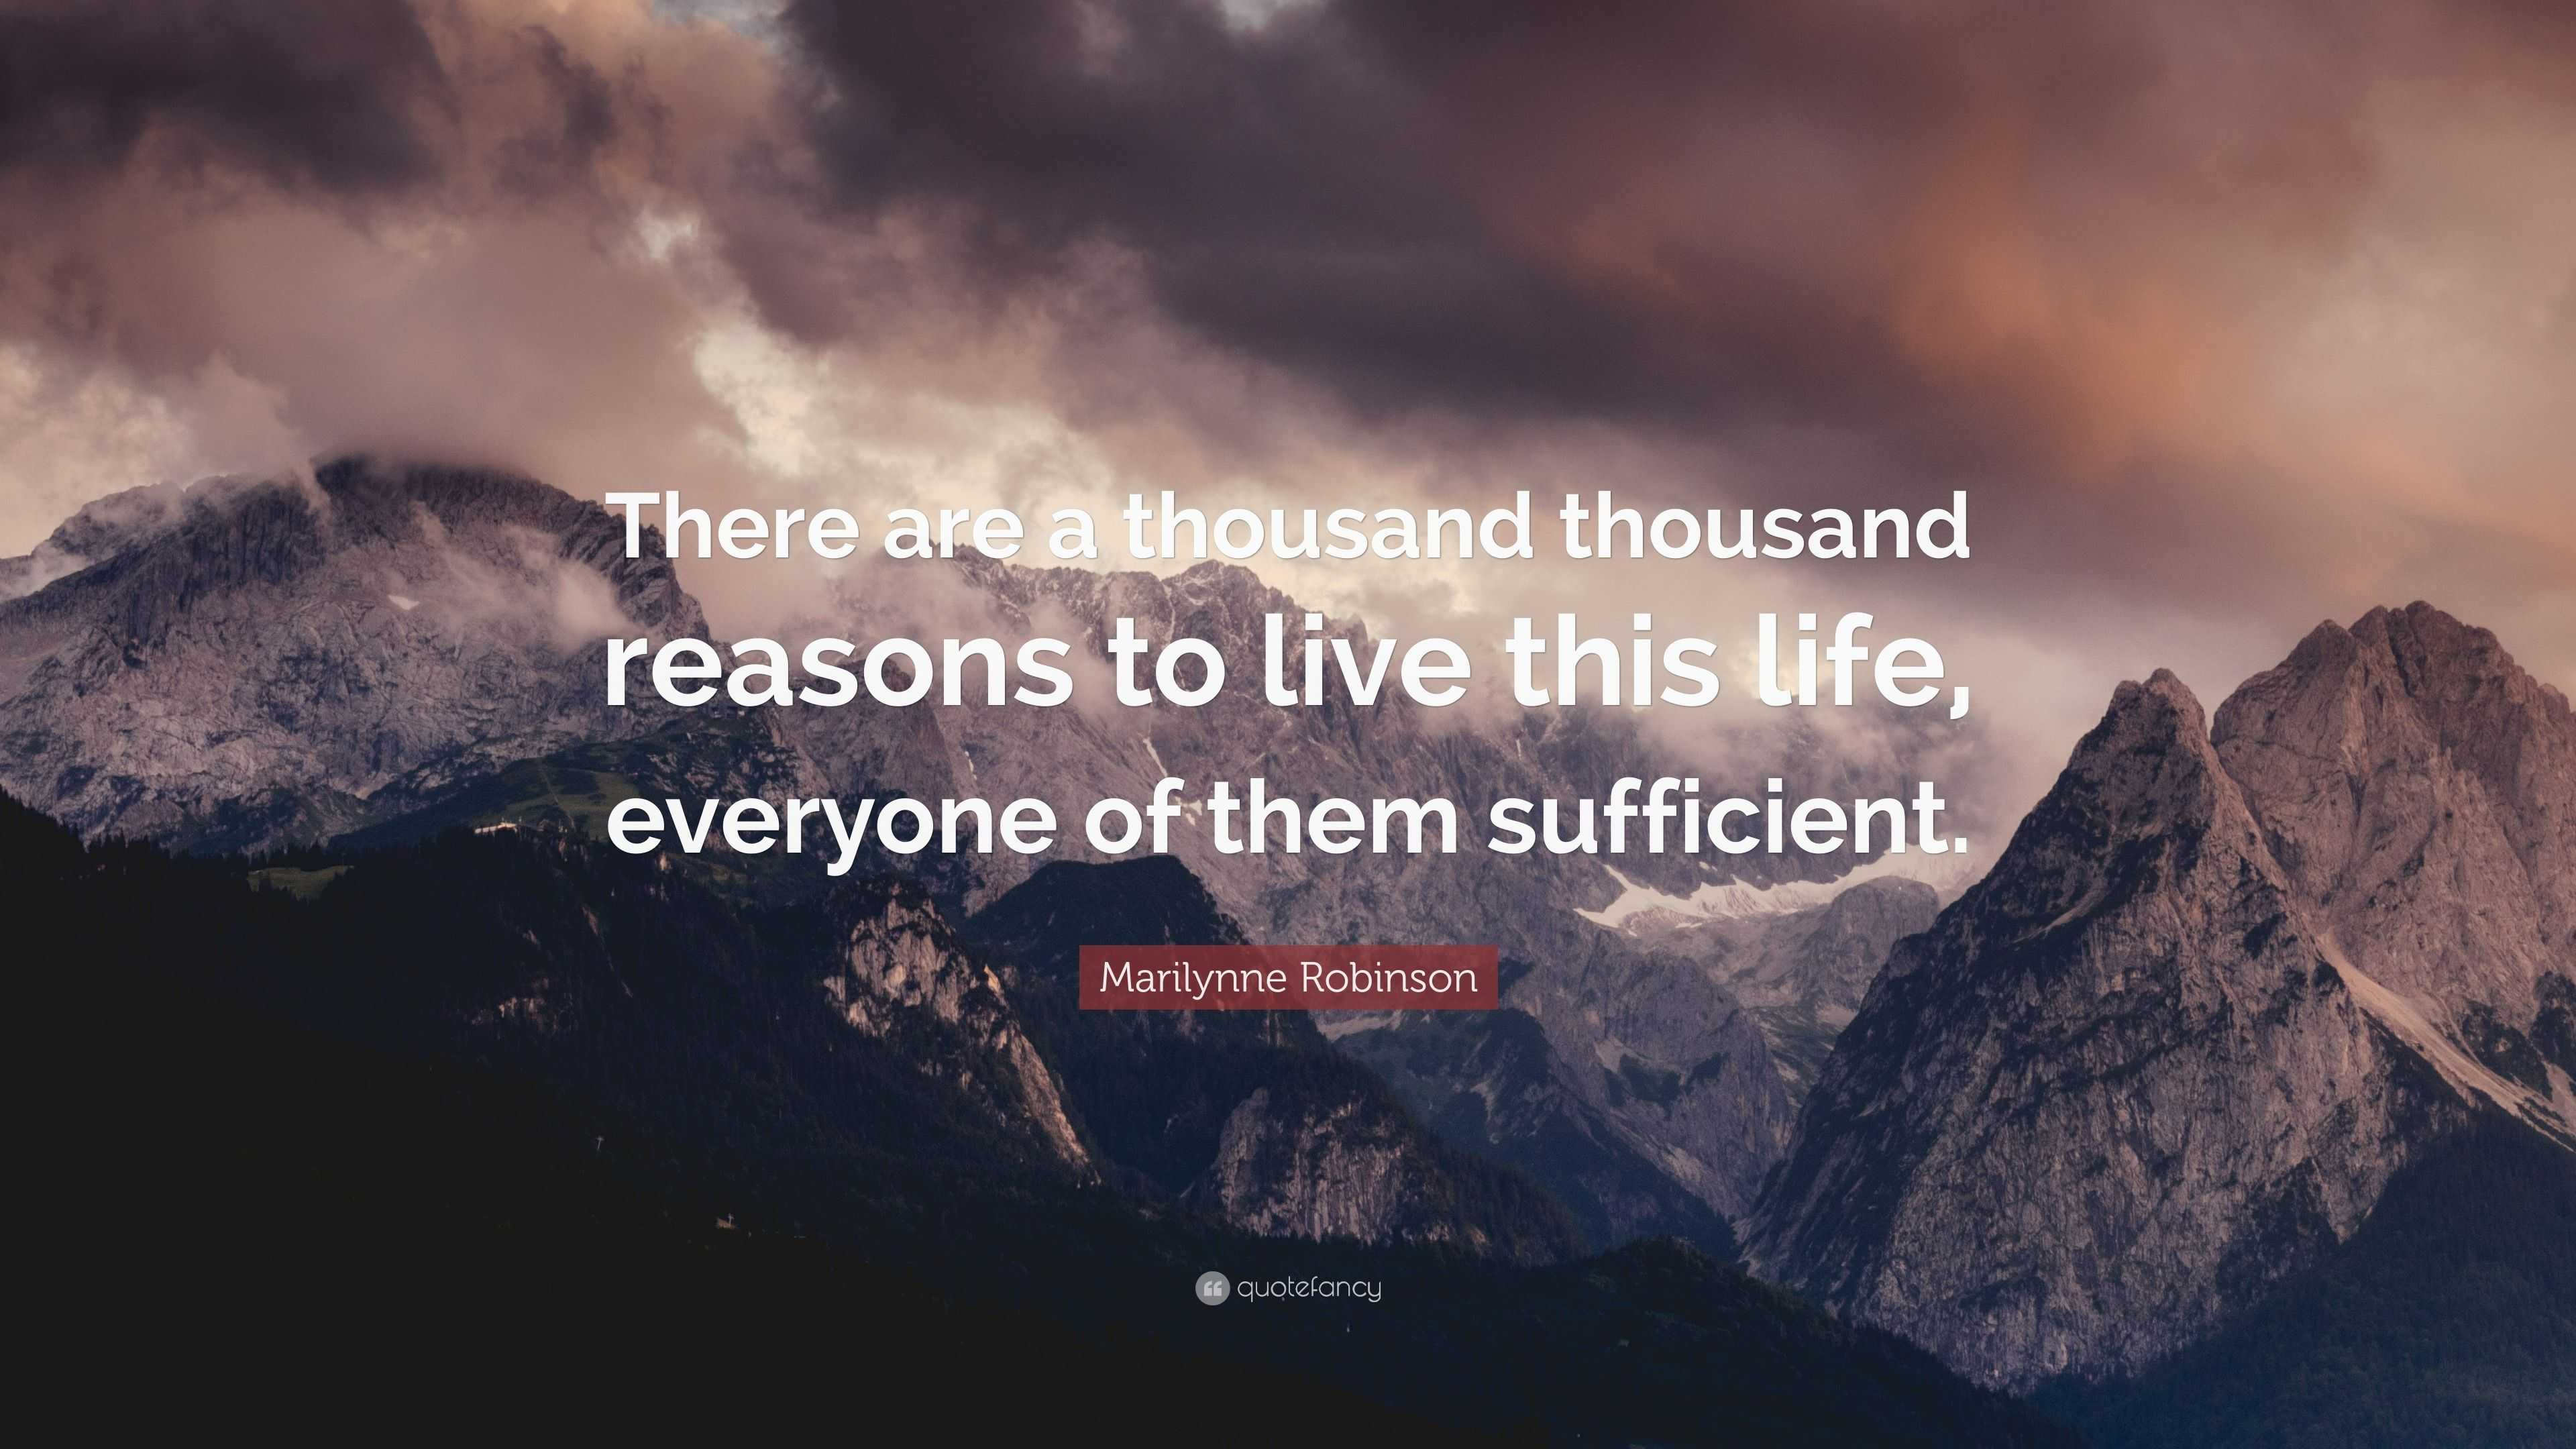 Marilynne Robinson Quote: “There are a thousand thousand reasons to ...